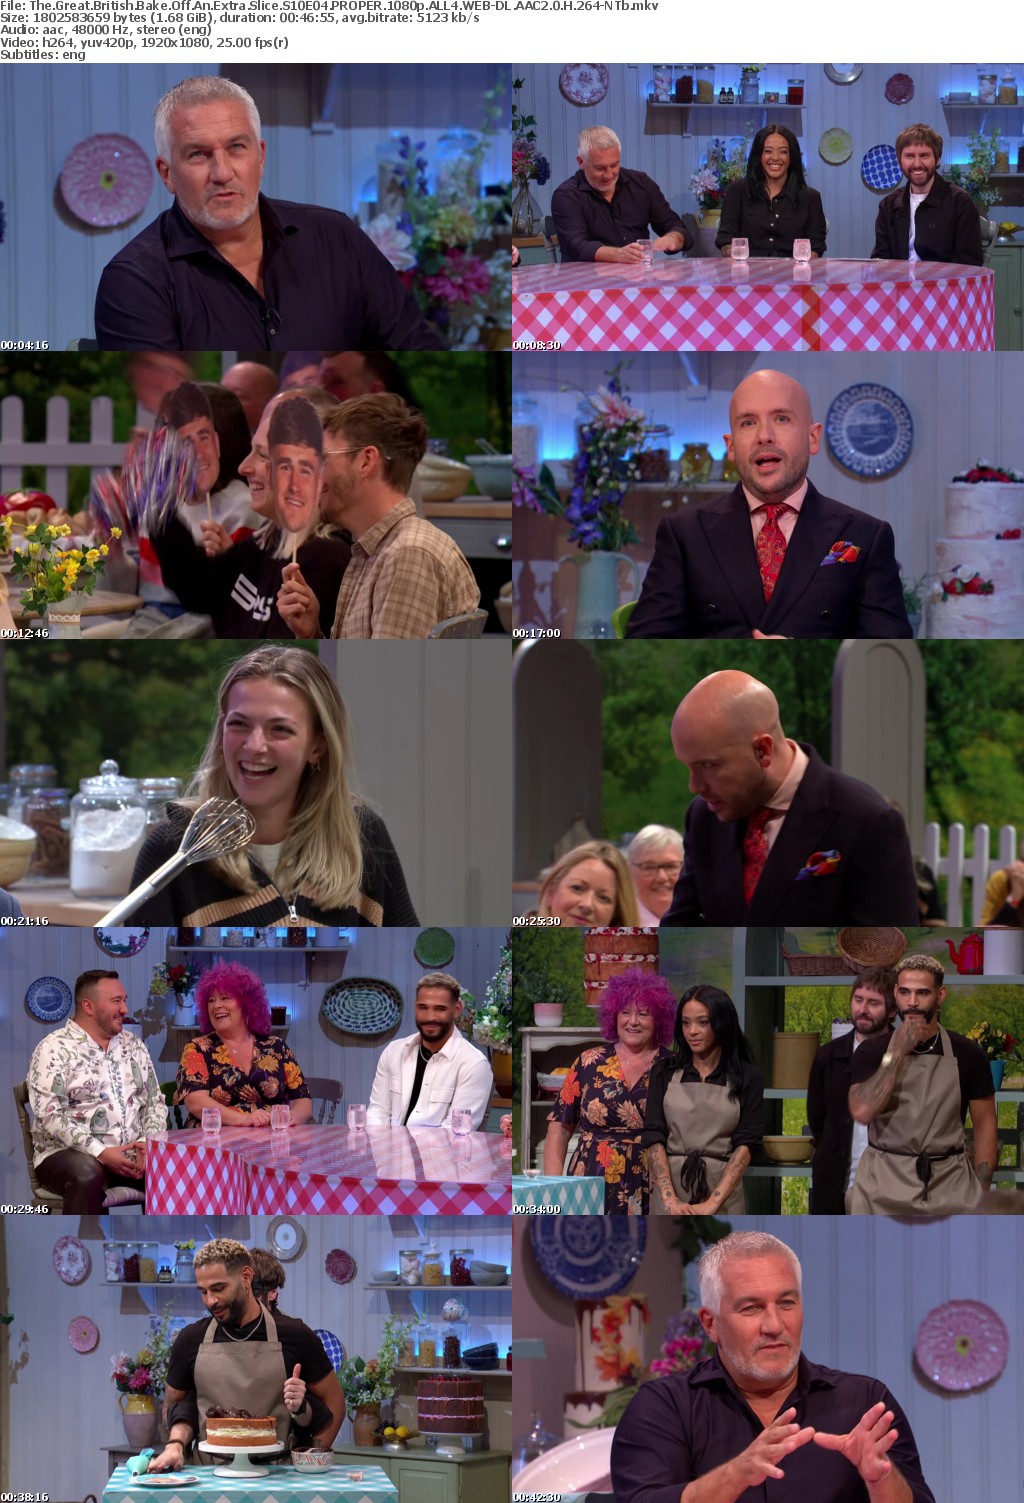 The Great British Bake Off An Extra Slice S10E04 PROPER 1080p ALL4 WEB-DL AAC2 0 H 264-NTb